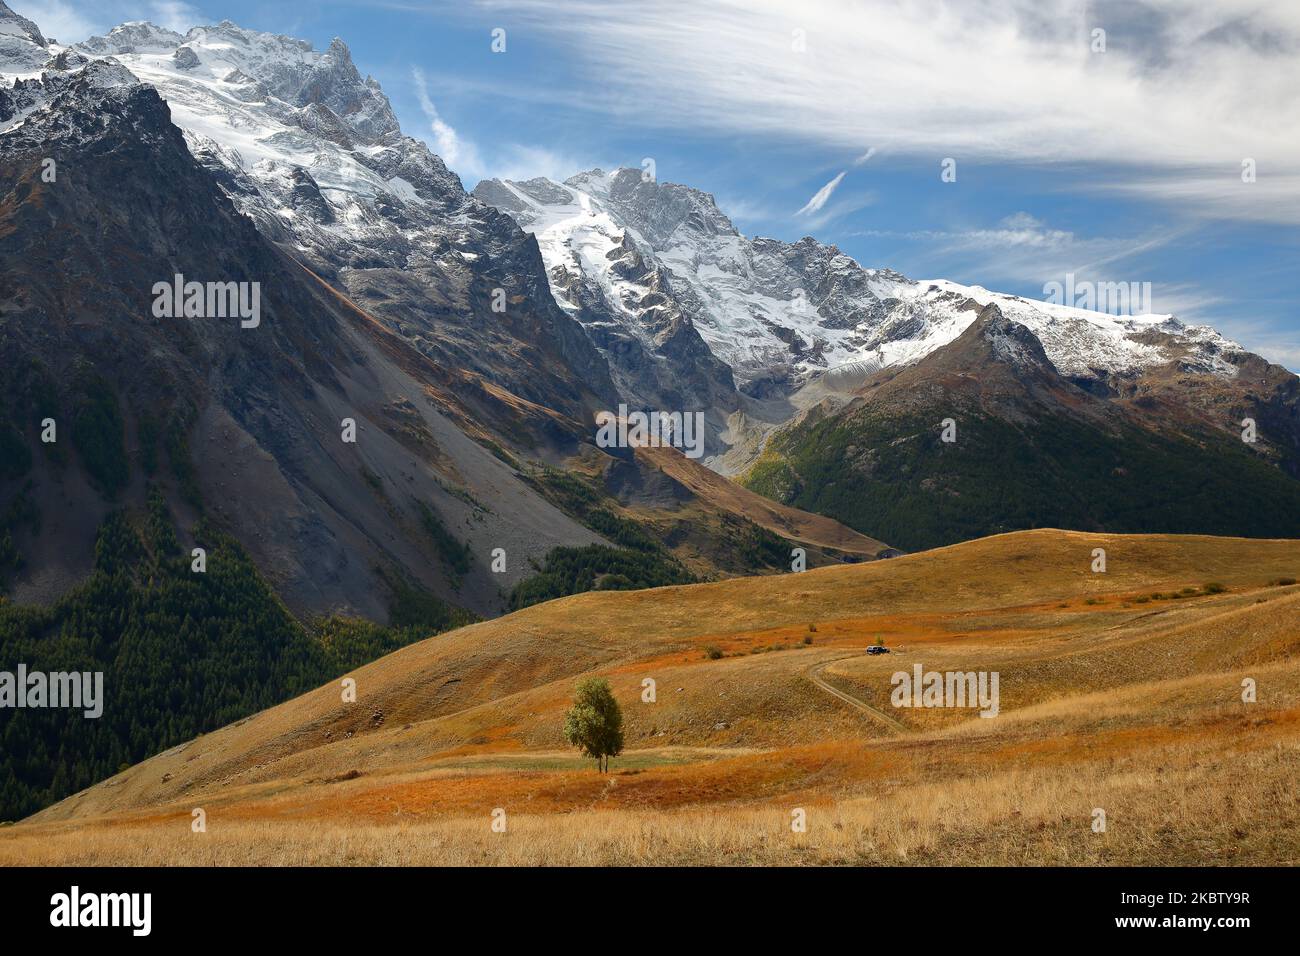 General view of the Meije Peak in Ecrins National Park, Romanche Valley, Hautes Alpes (French Southern Alps), France, with Autumn colors Stock Photo